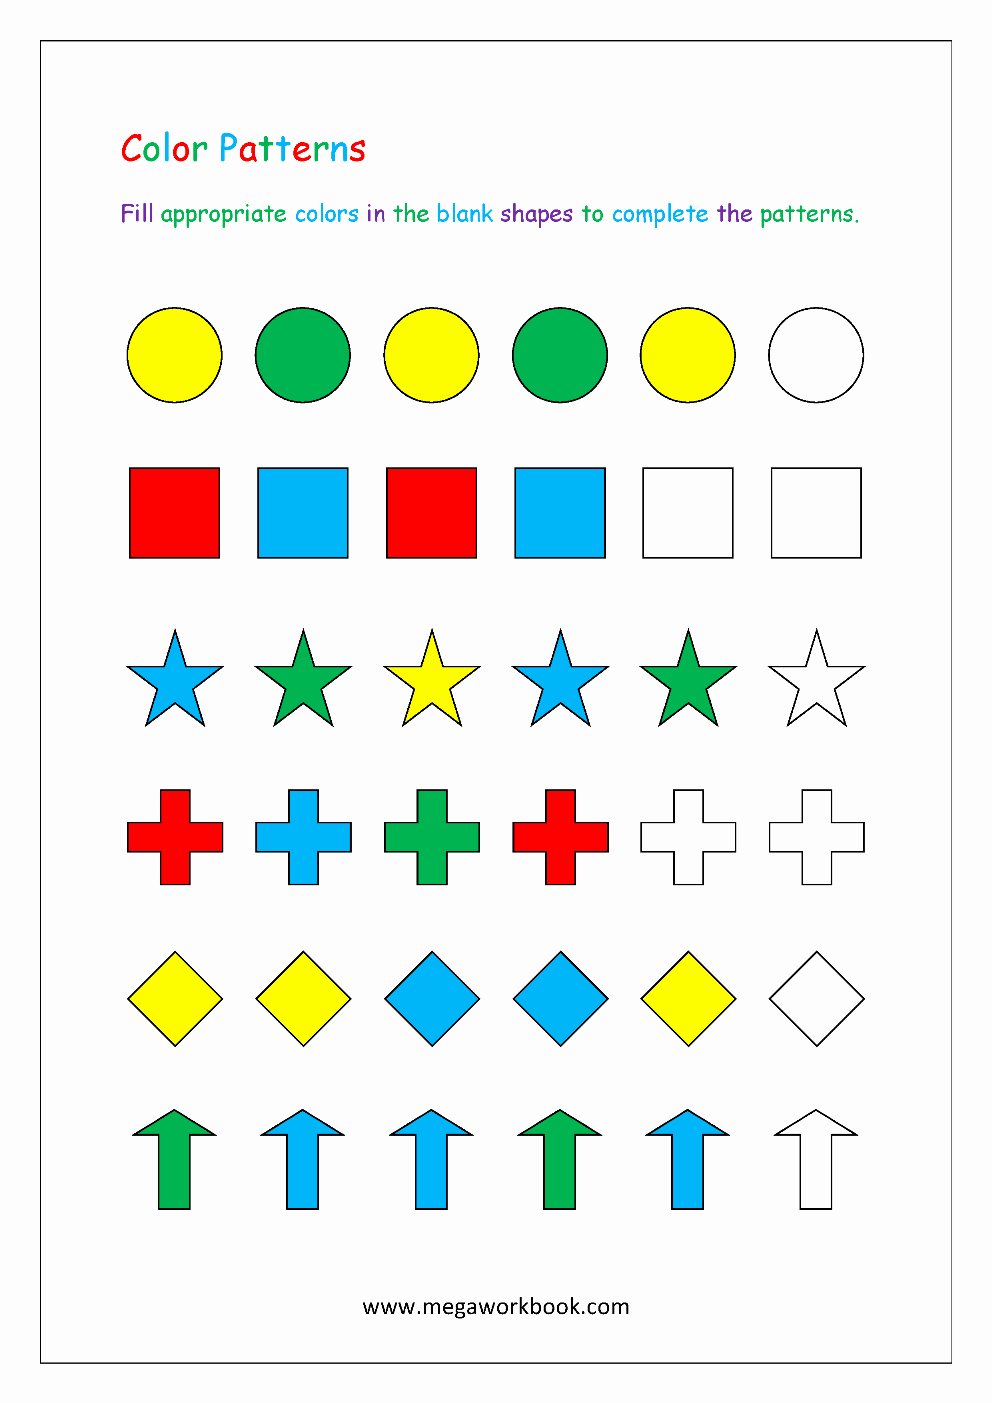 Repeated Pattern Worksheets Awesome Color Pattern Worksheet Repeating Patterns